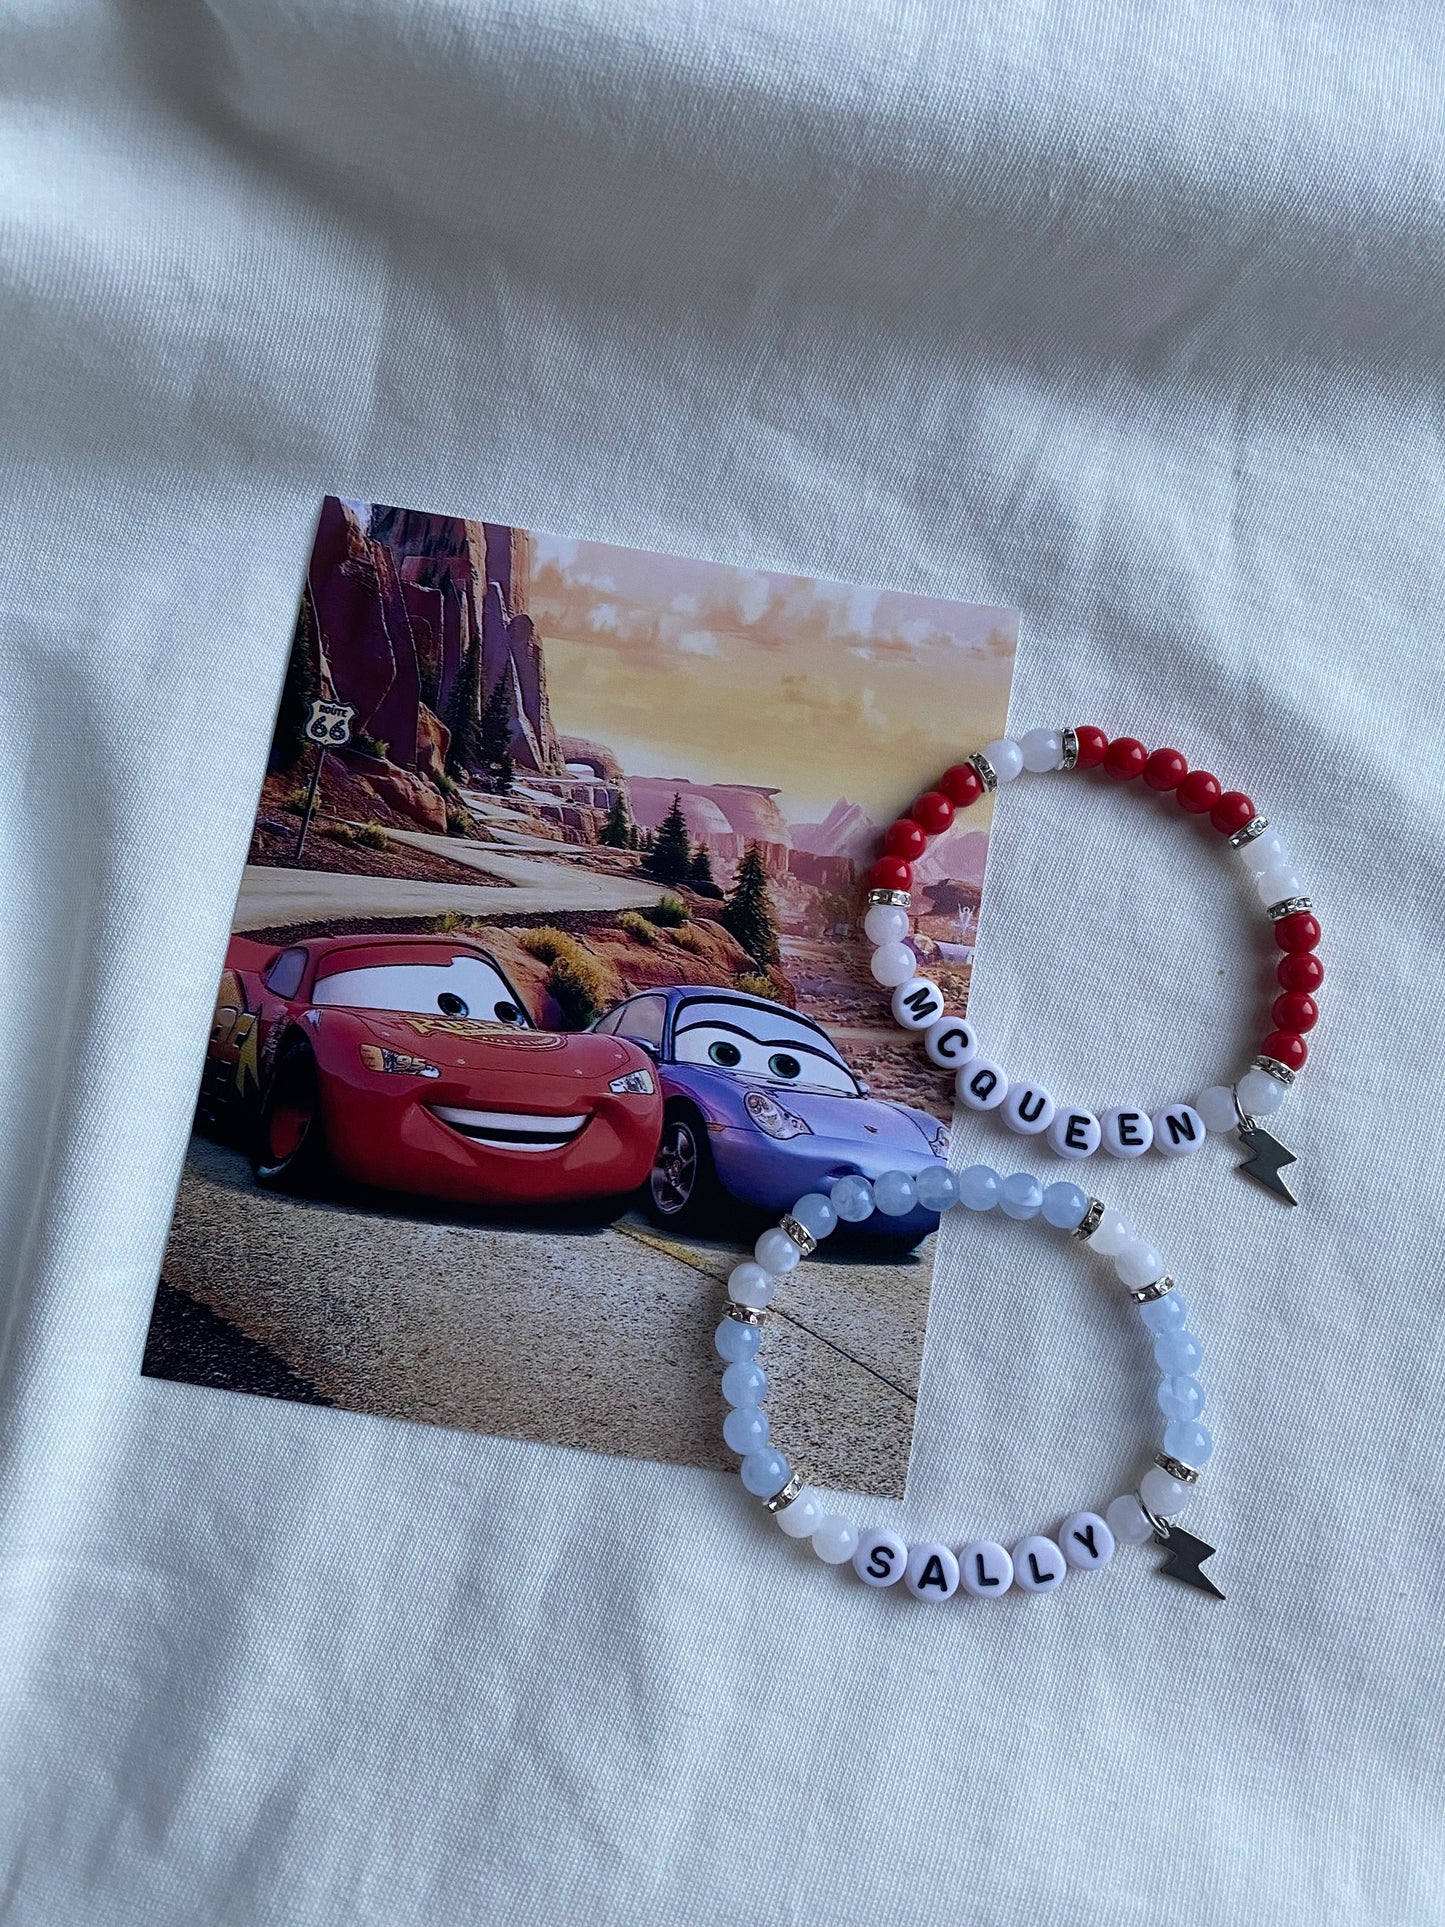 McQueen and Sally matching bracelets